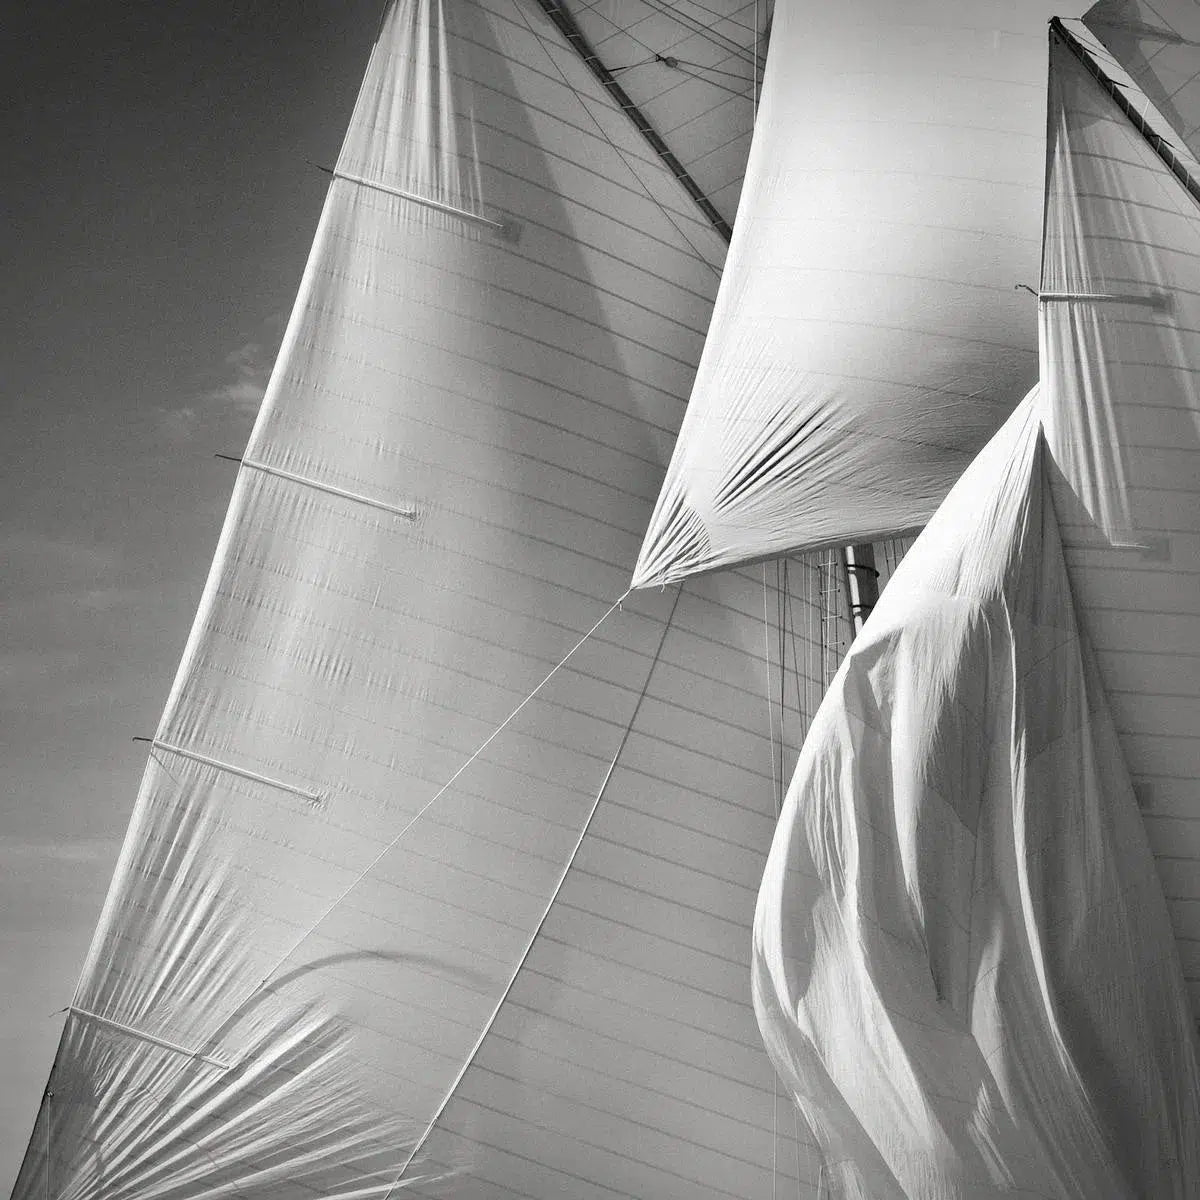 Sails of Mariette, by Jonathan Chritchley-PurePhoto